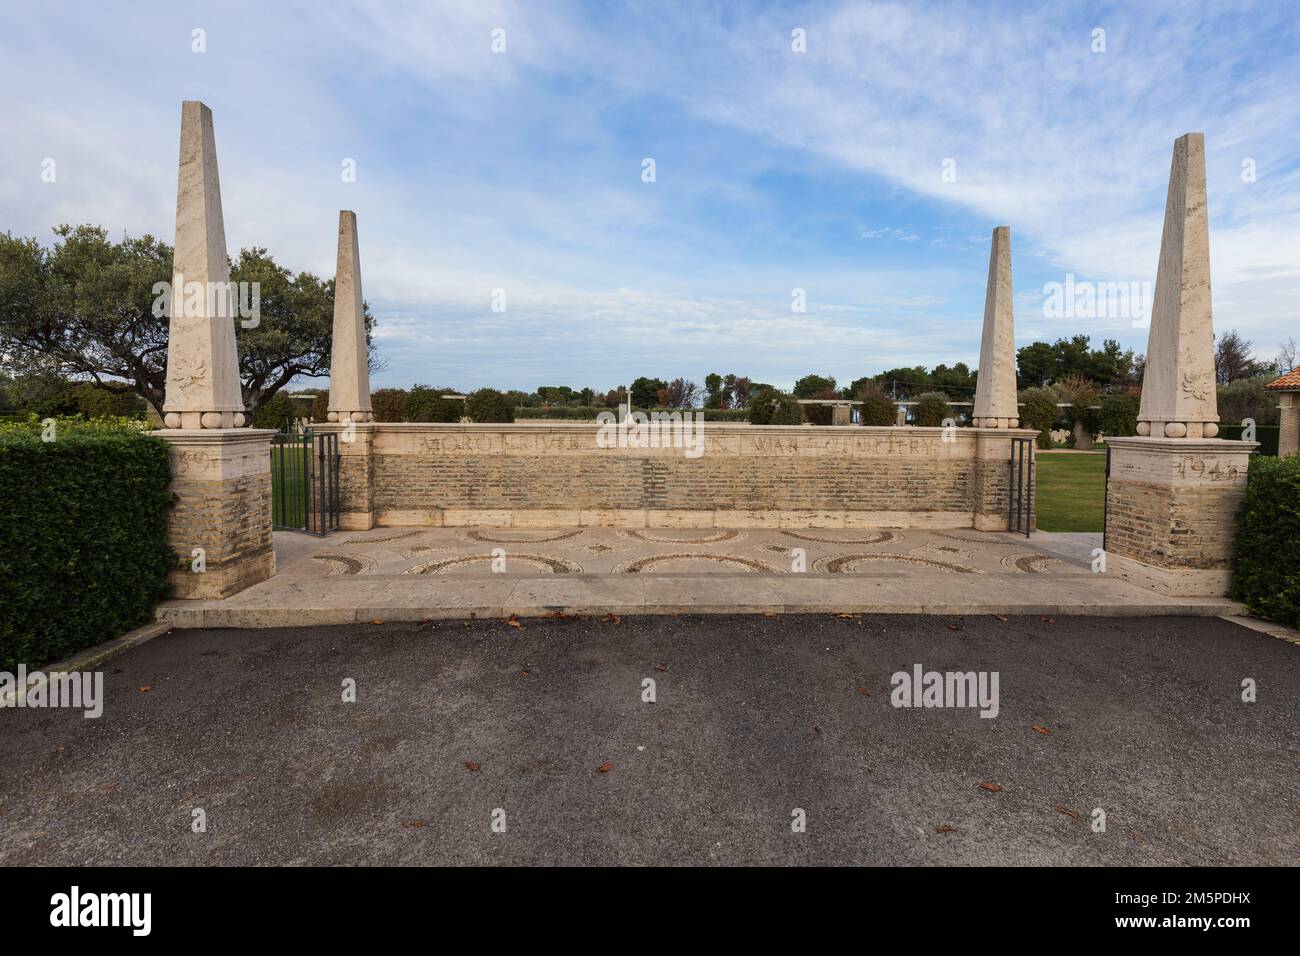 The Canadian military cemetery. Italy donated the land on which the cemetery stands in order to thank and honour the ultimate sacrifice. Stock Photo